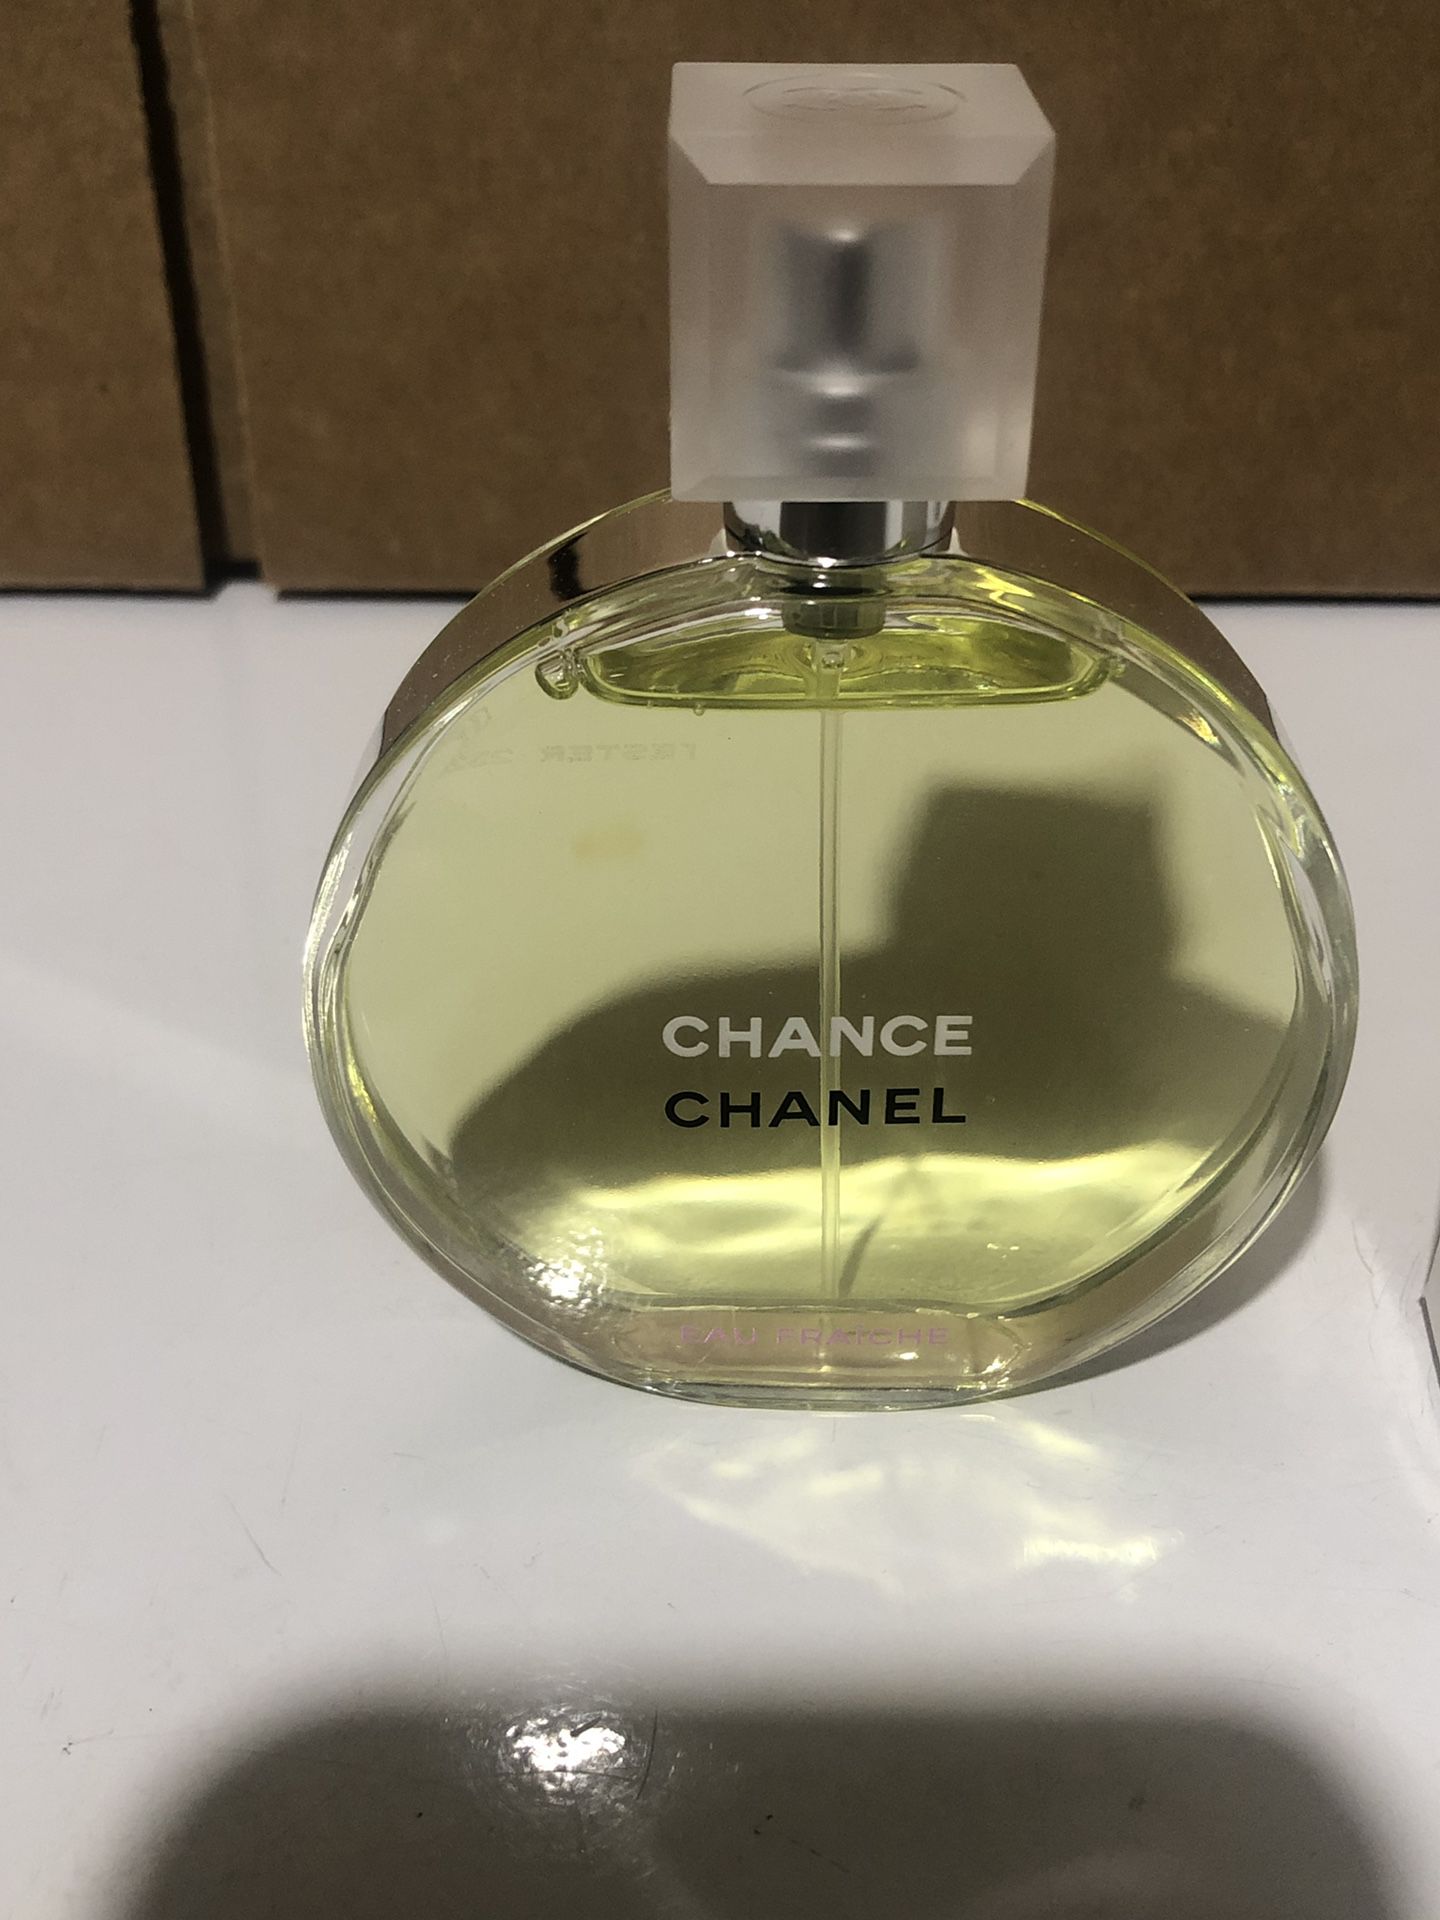 76% off, Rs 13500 only for Chanel Chance Perfume for Women (Original) 